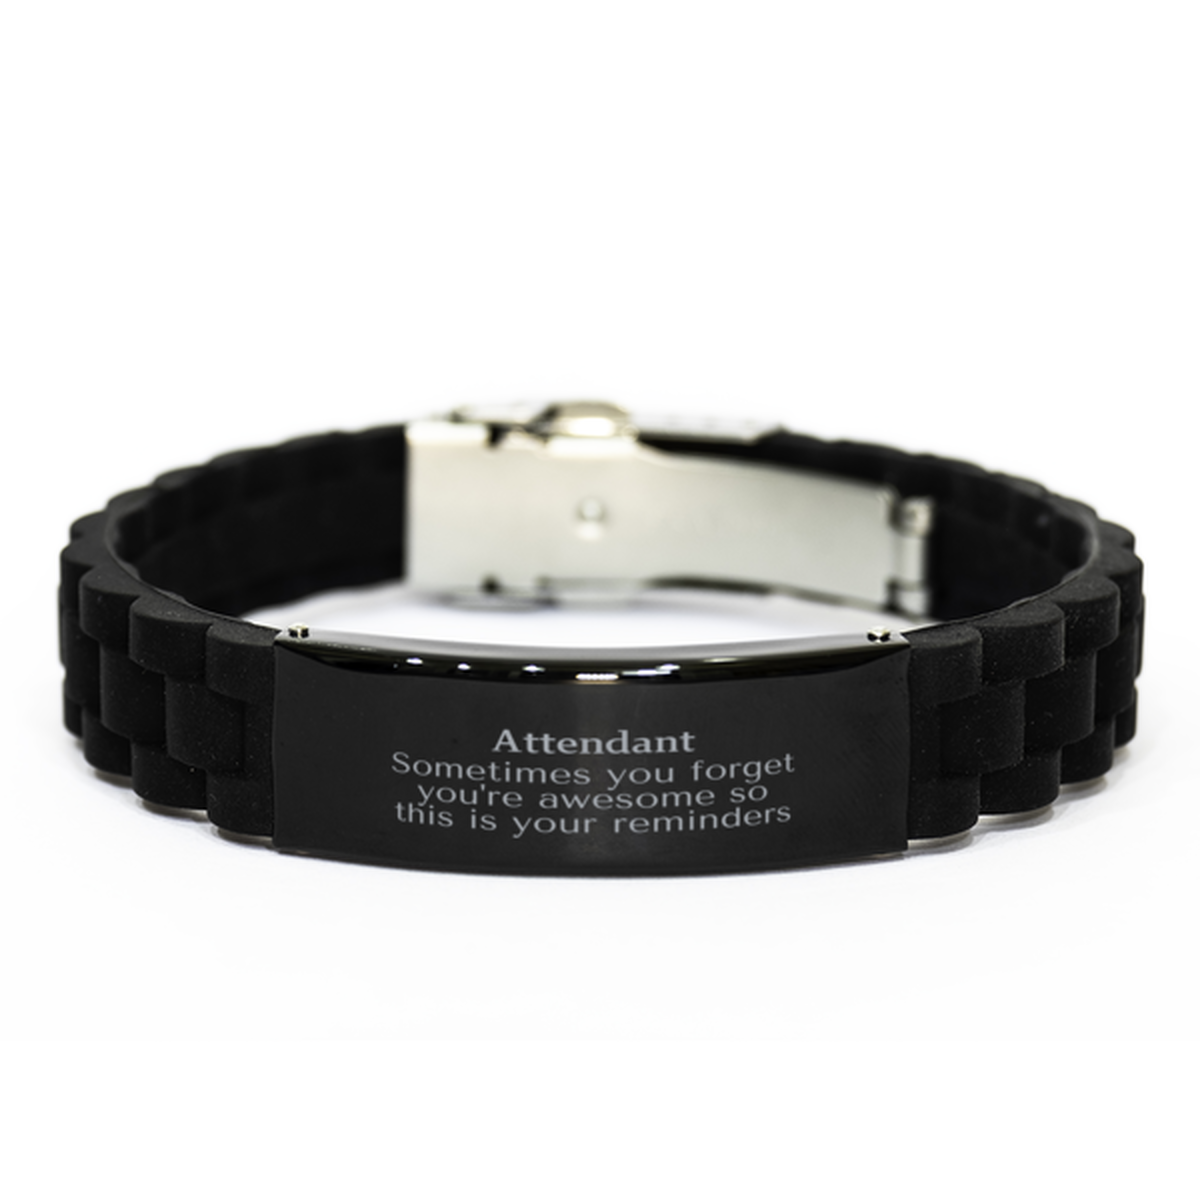 Sentimental Attendant Black Glidelock Clasp Bracelet, Attendant Sometimes you forget you're awesome so this is your reminders, Graduation Christmas Birthday Gifts for Attendant, Men, Women, Coworkers